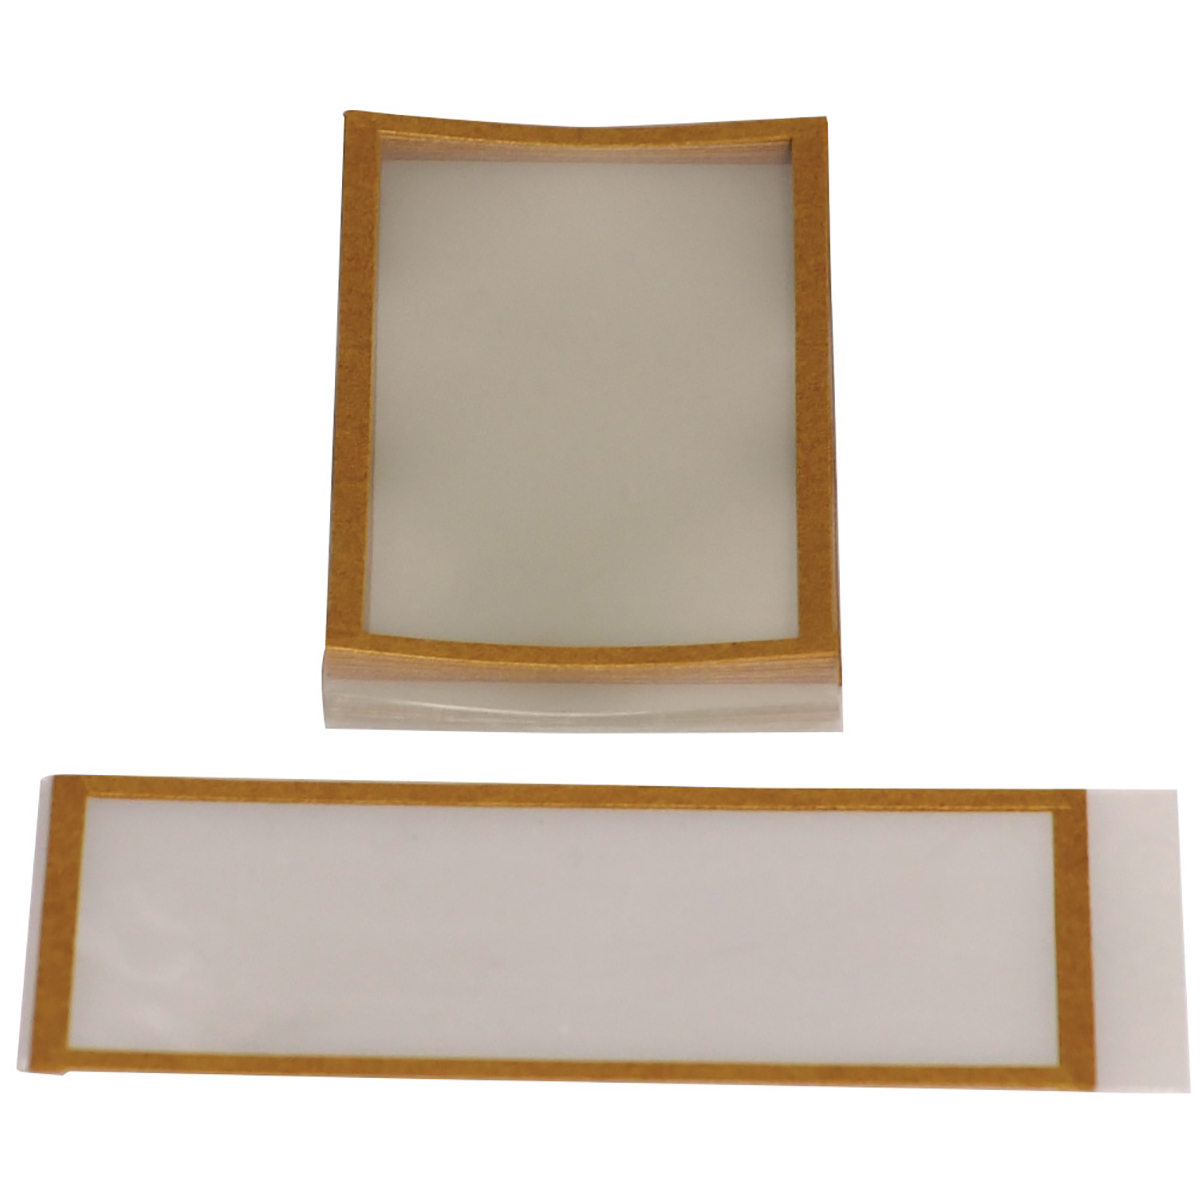 Bullard® Mylar Adhesive Backed Lens Cover For 88VX (25 Per Pack) (Availability restrictions apply.)